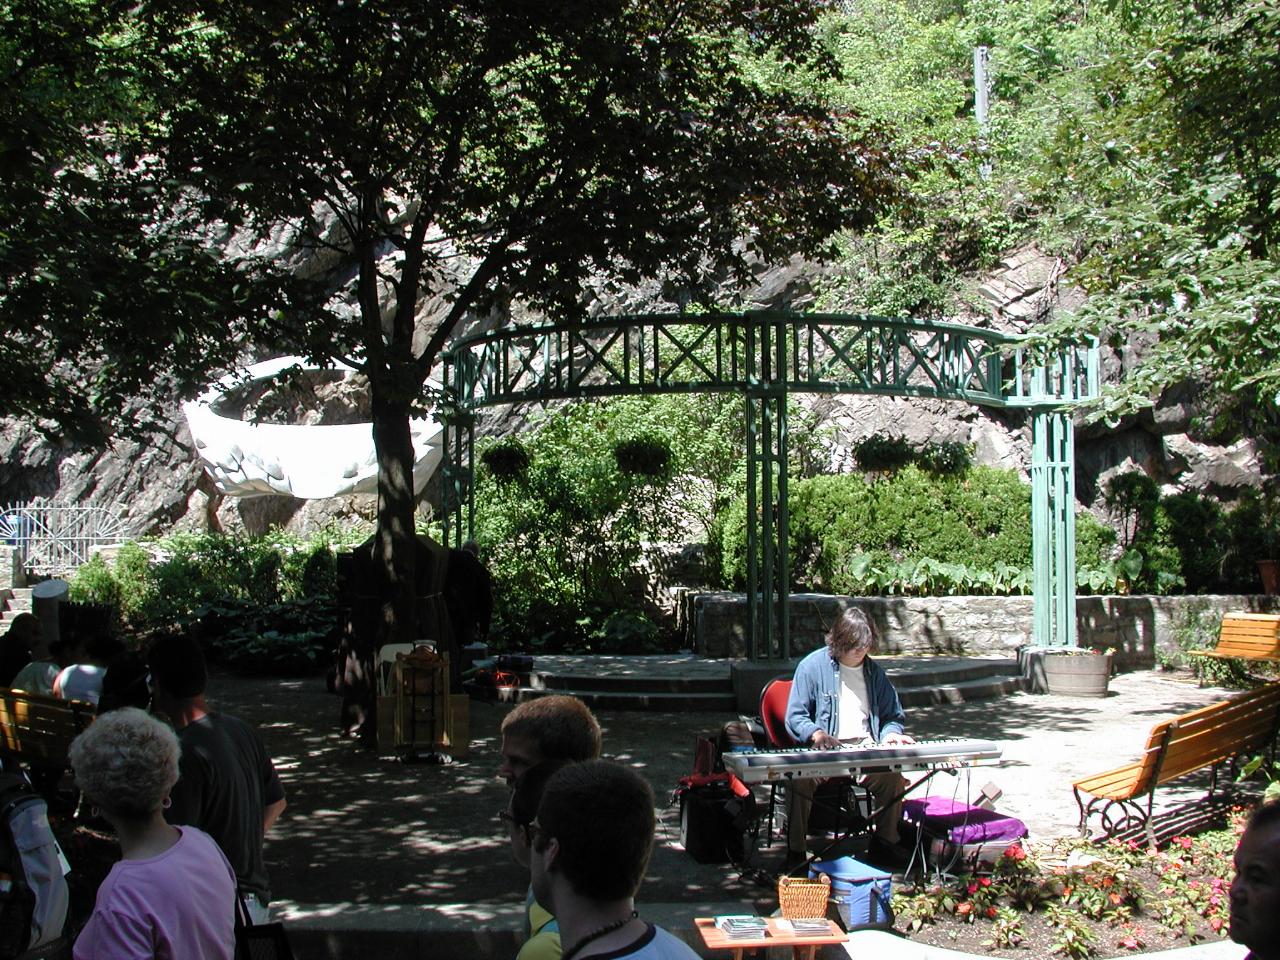 A tiny park, with entertainers, along 